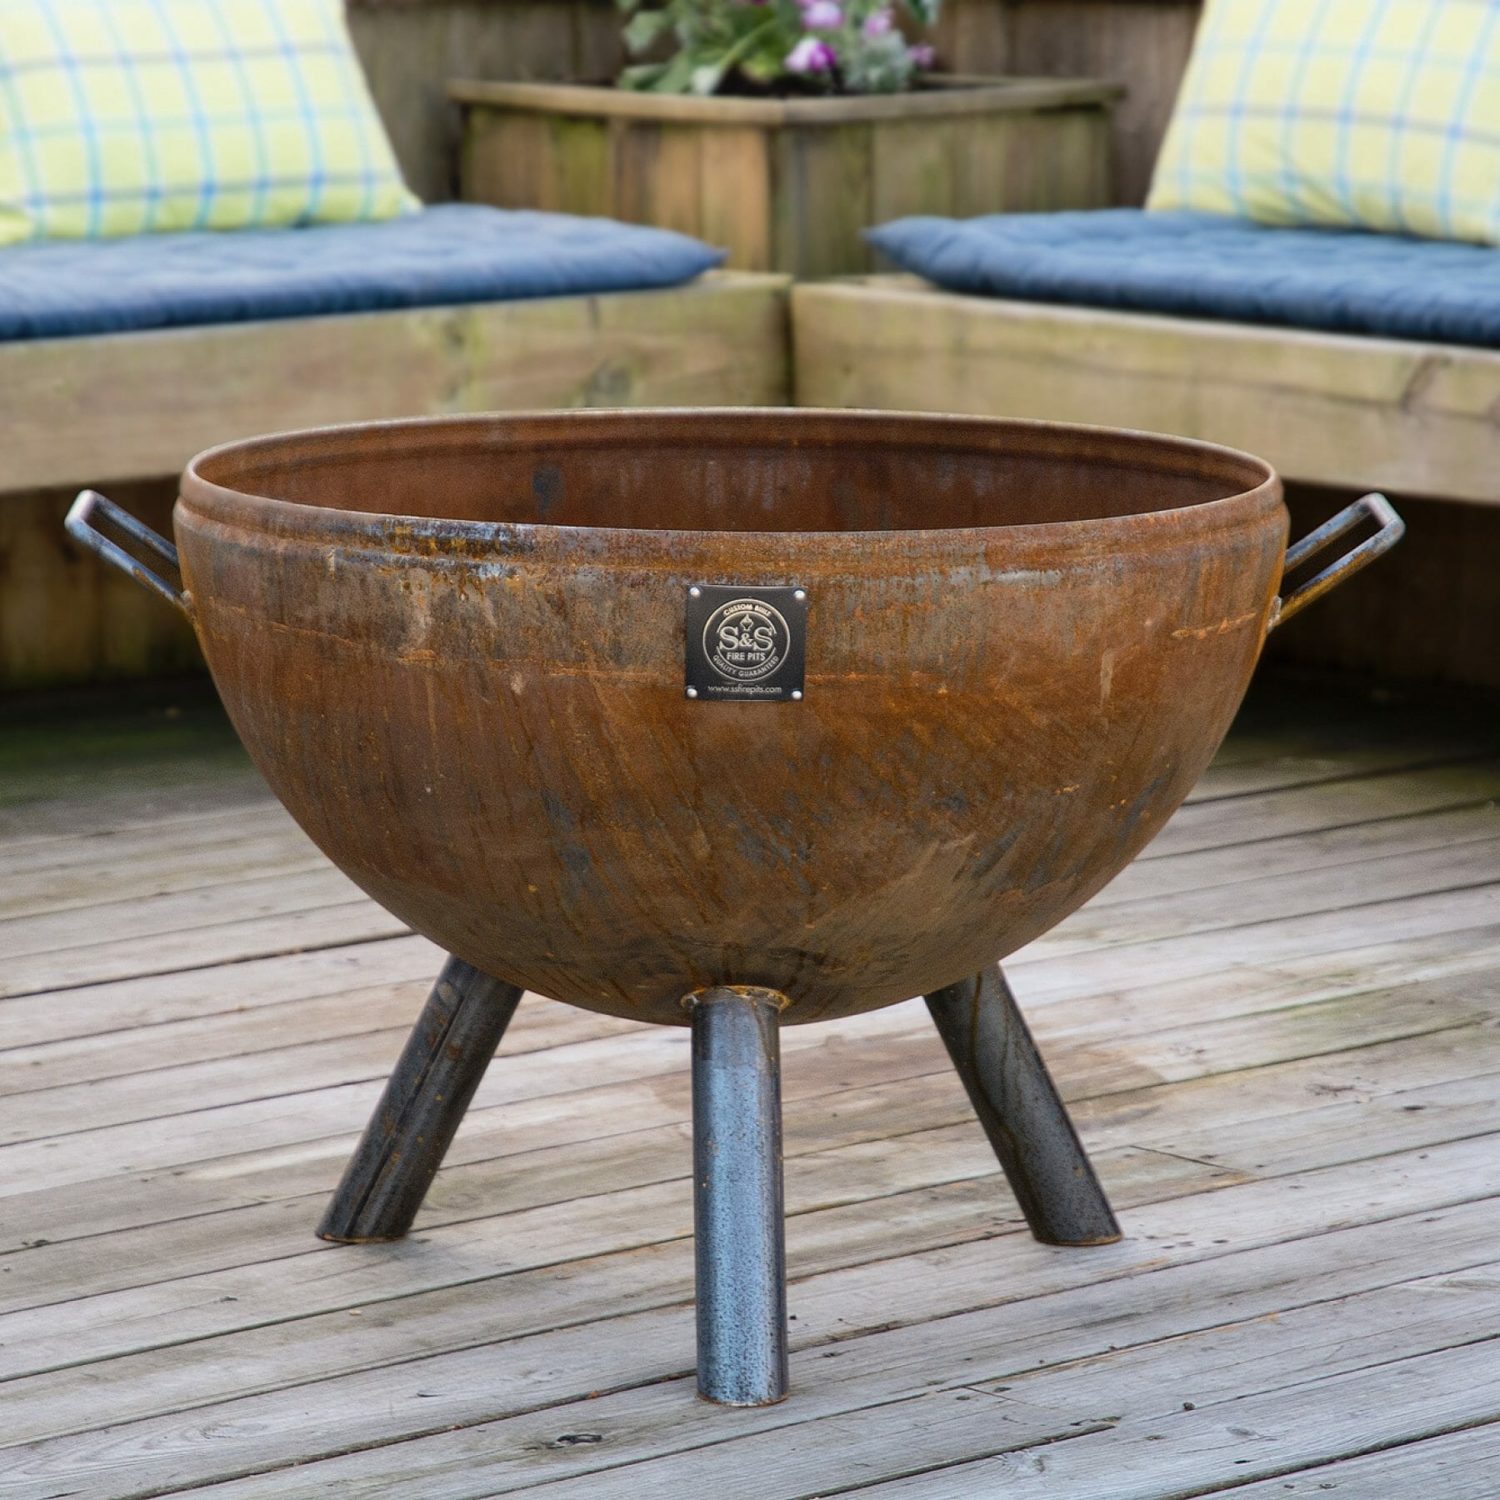 30 Hemisphere Fire Pit On Legs, Average Height Of Fire Pit